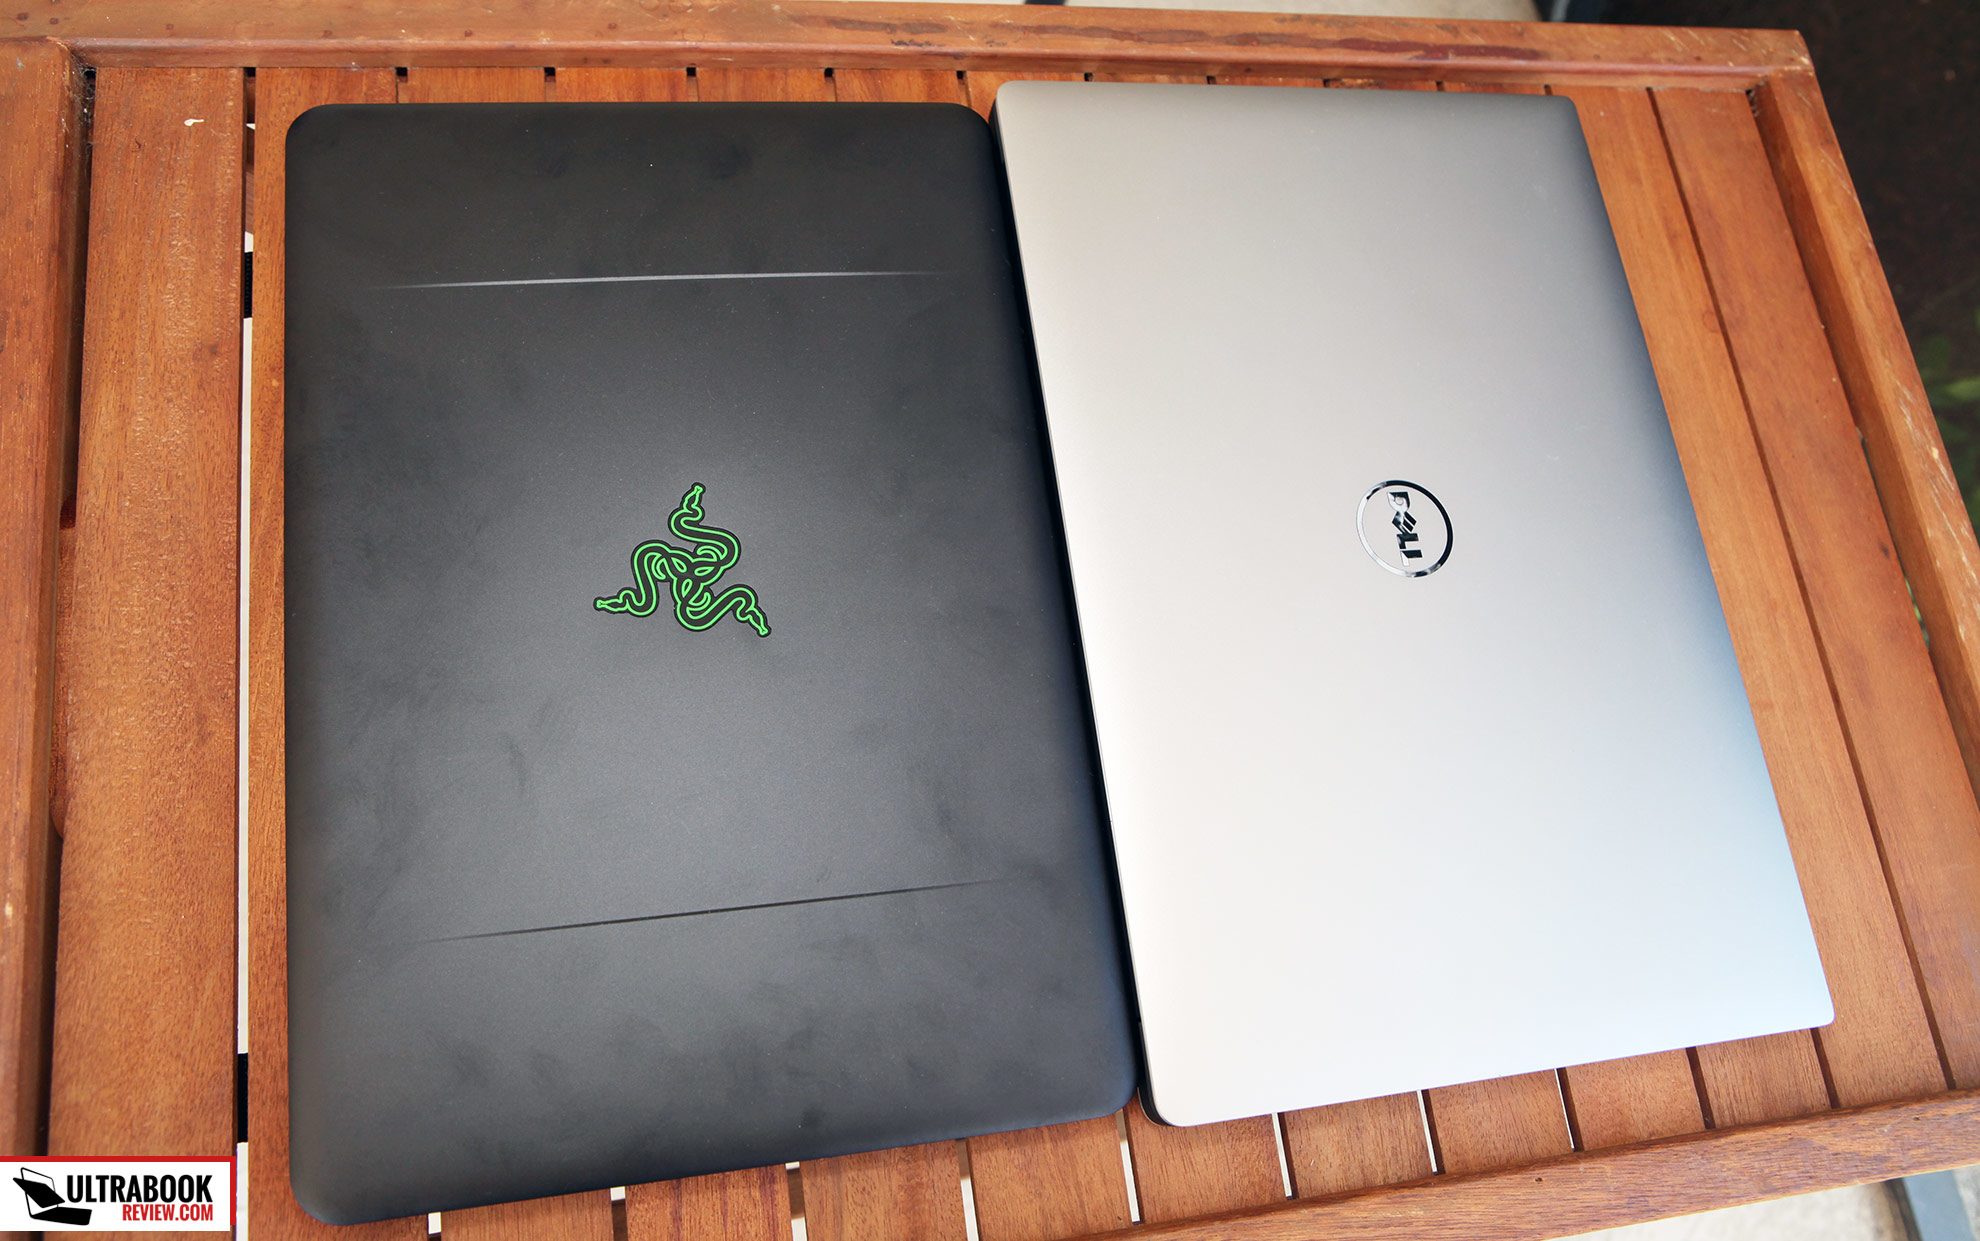 The dark Blade shows smudges easily, while the silver XPS looks much cleaner